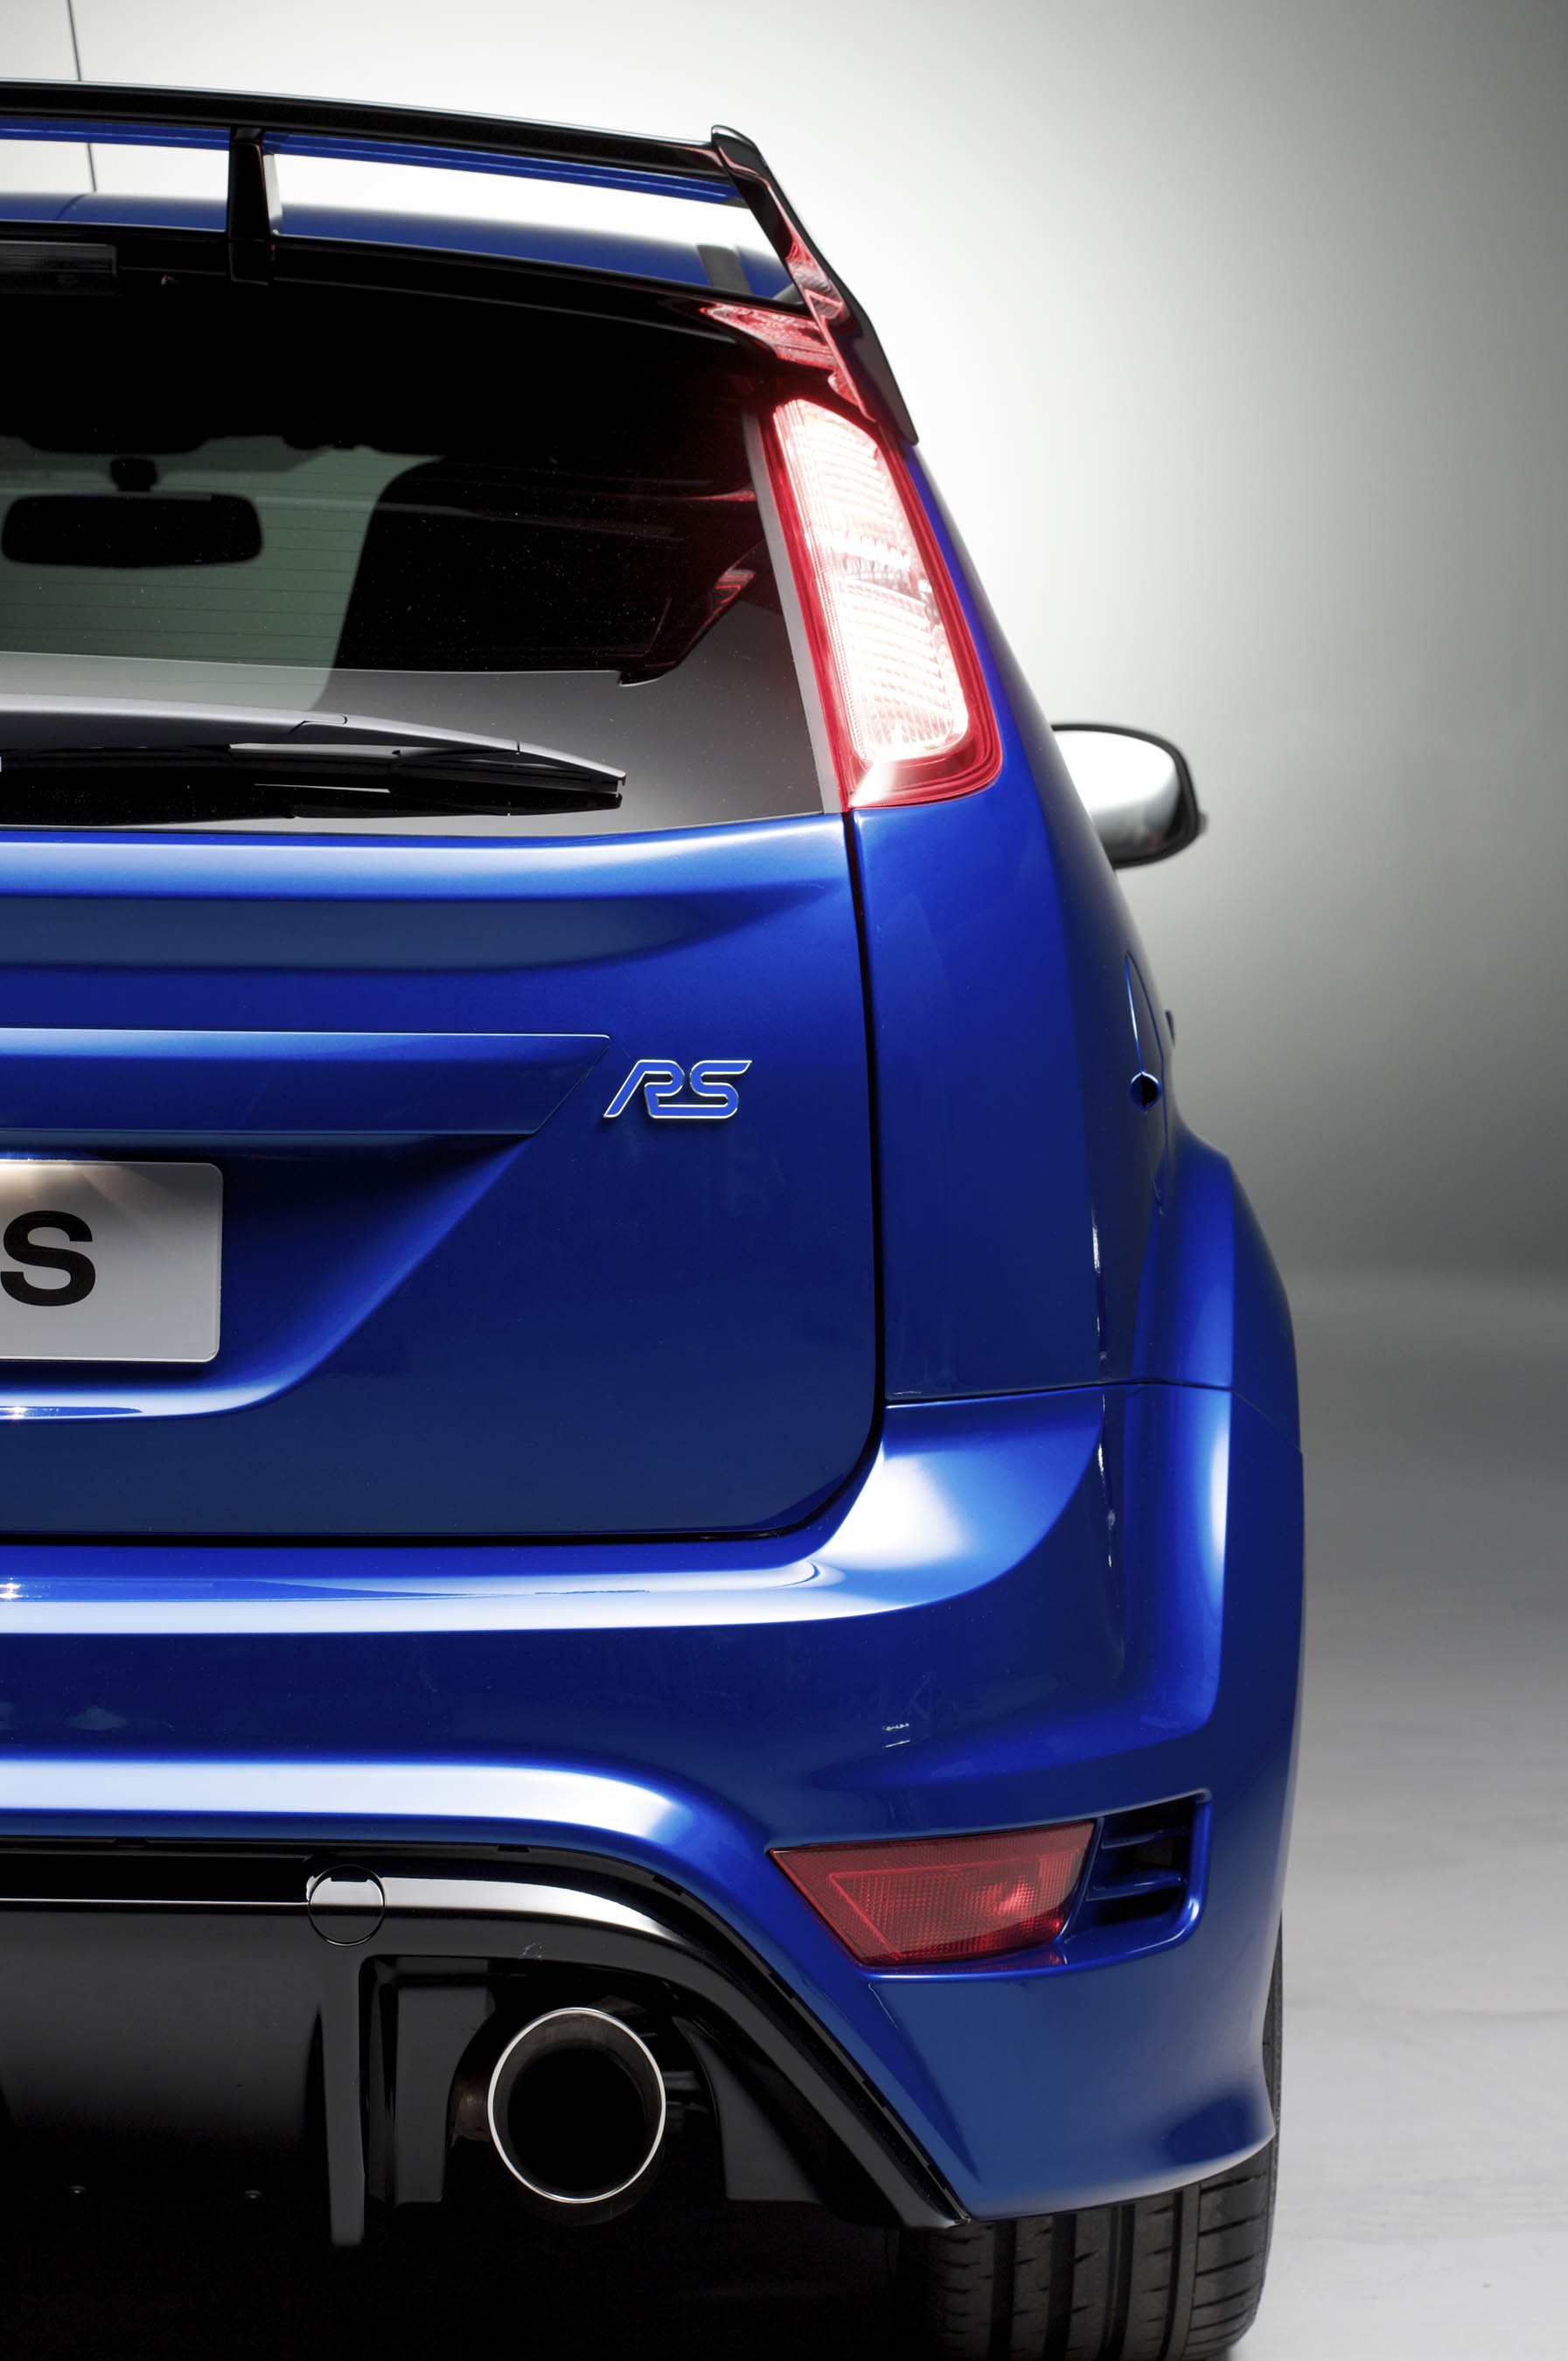 Ford Focus Rs - Ford Focus Rs Mk2 - 1793x2700 Wallpaper 